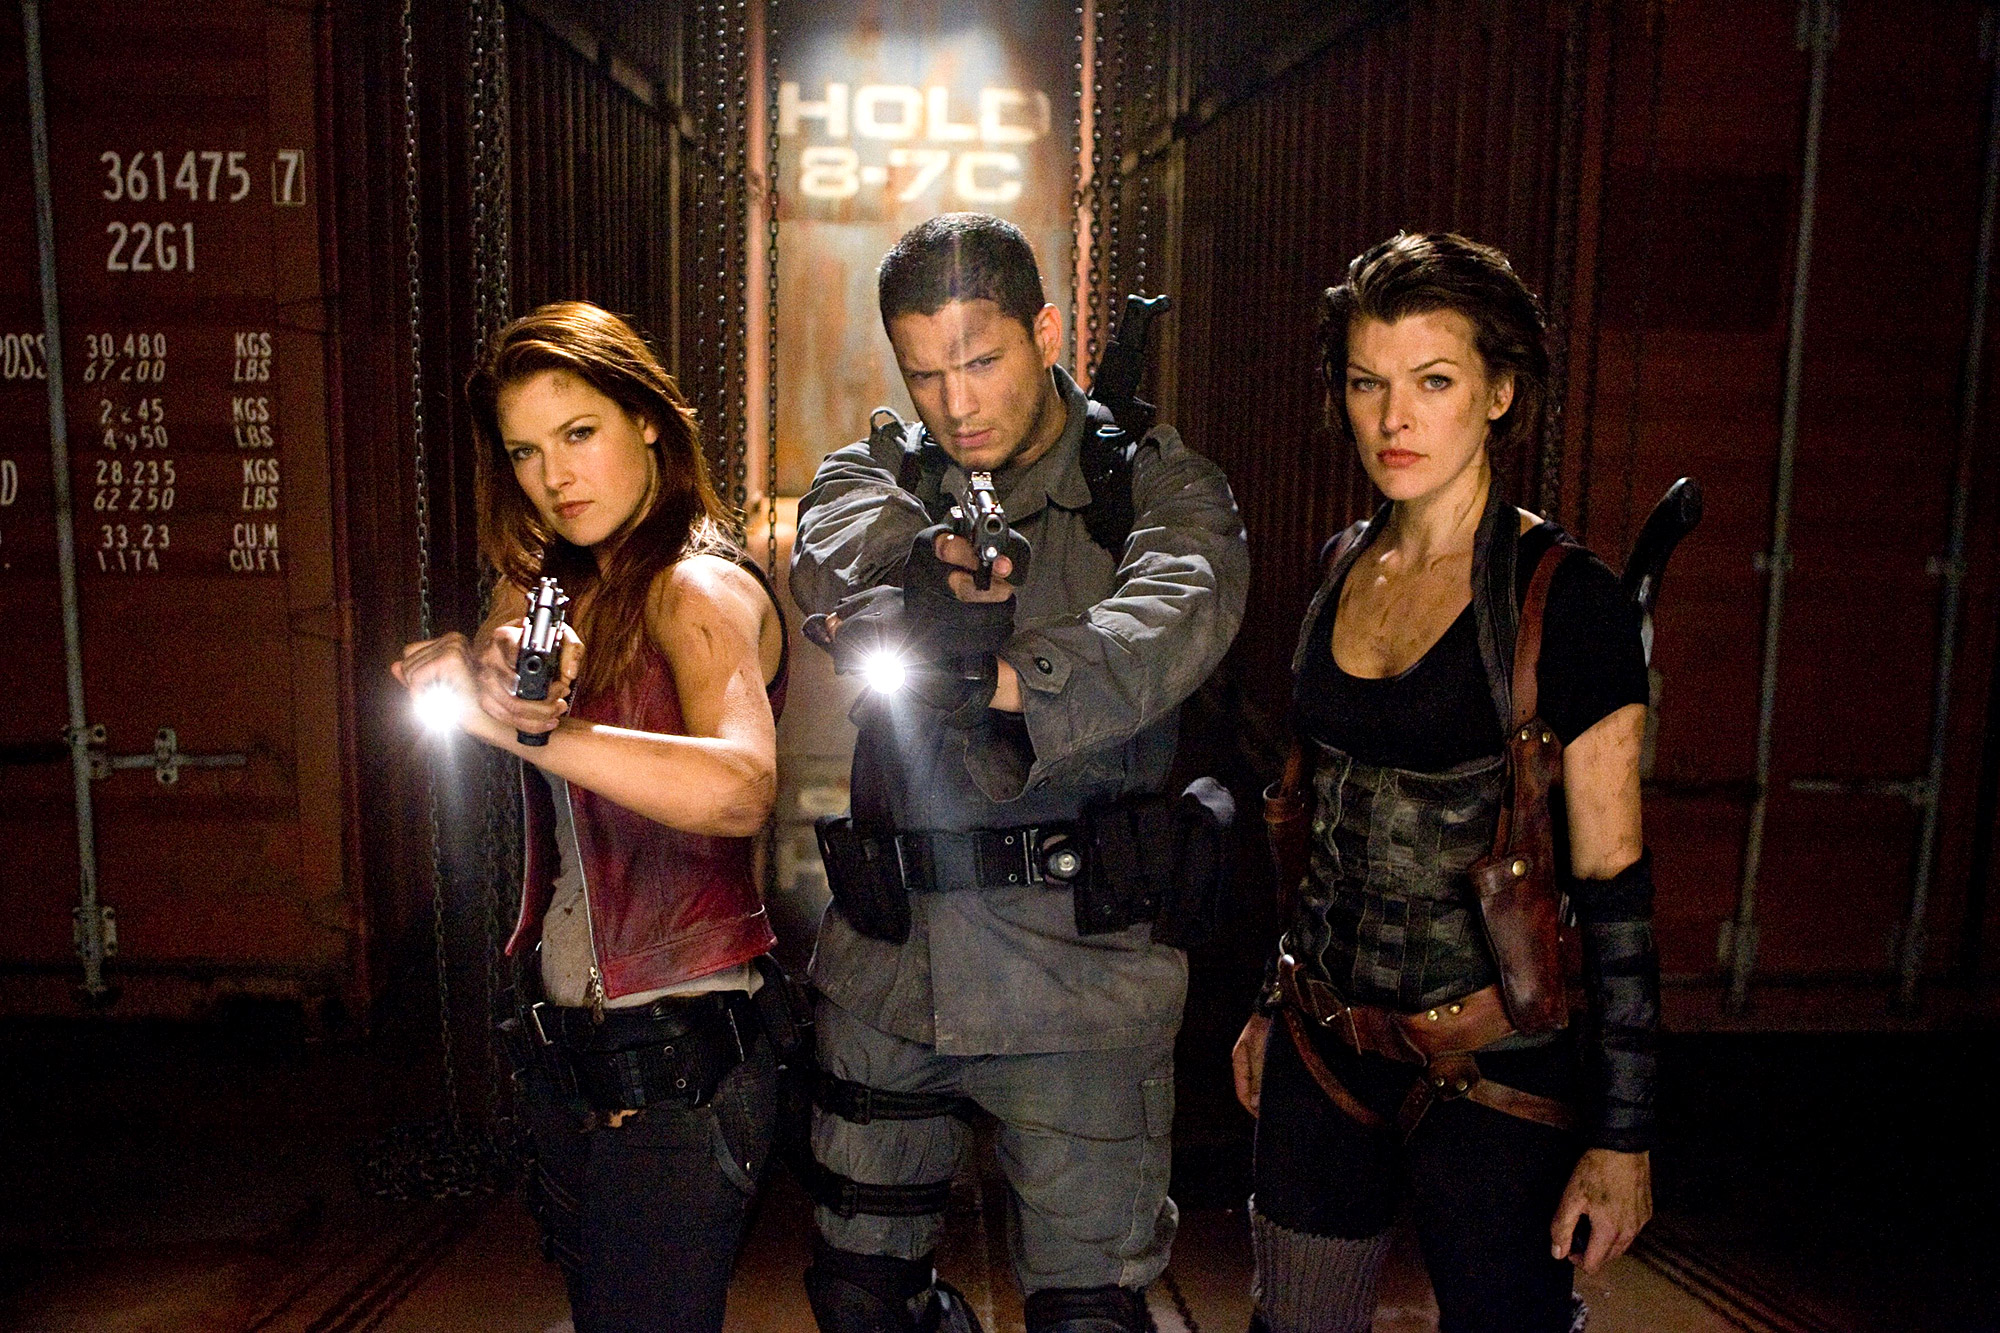 Resident Evil': How to Watch All the Movies in Order